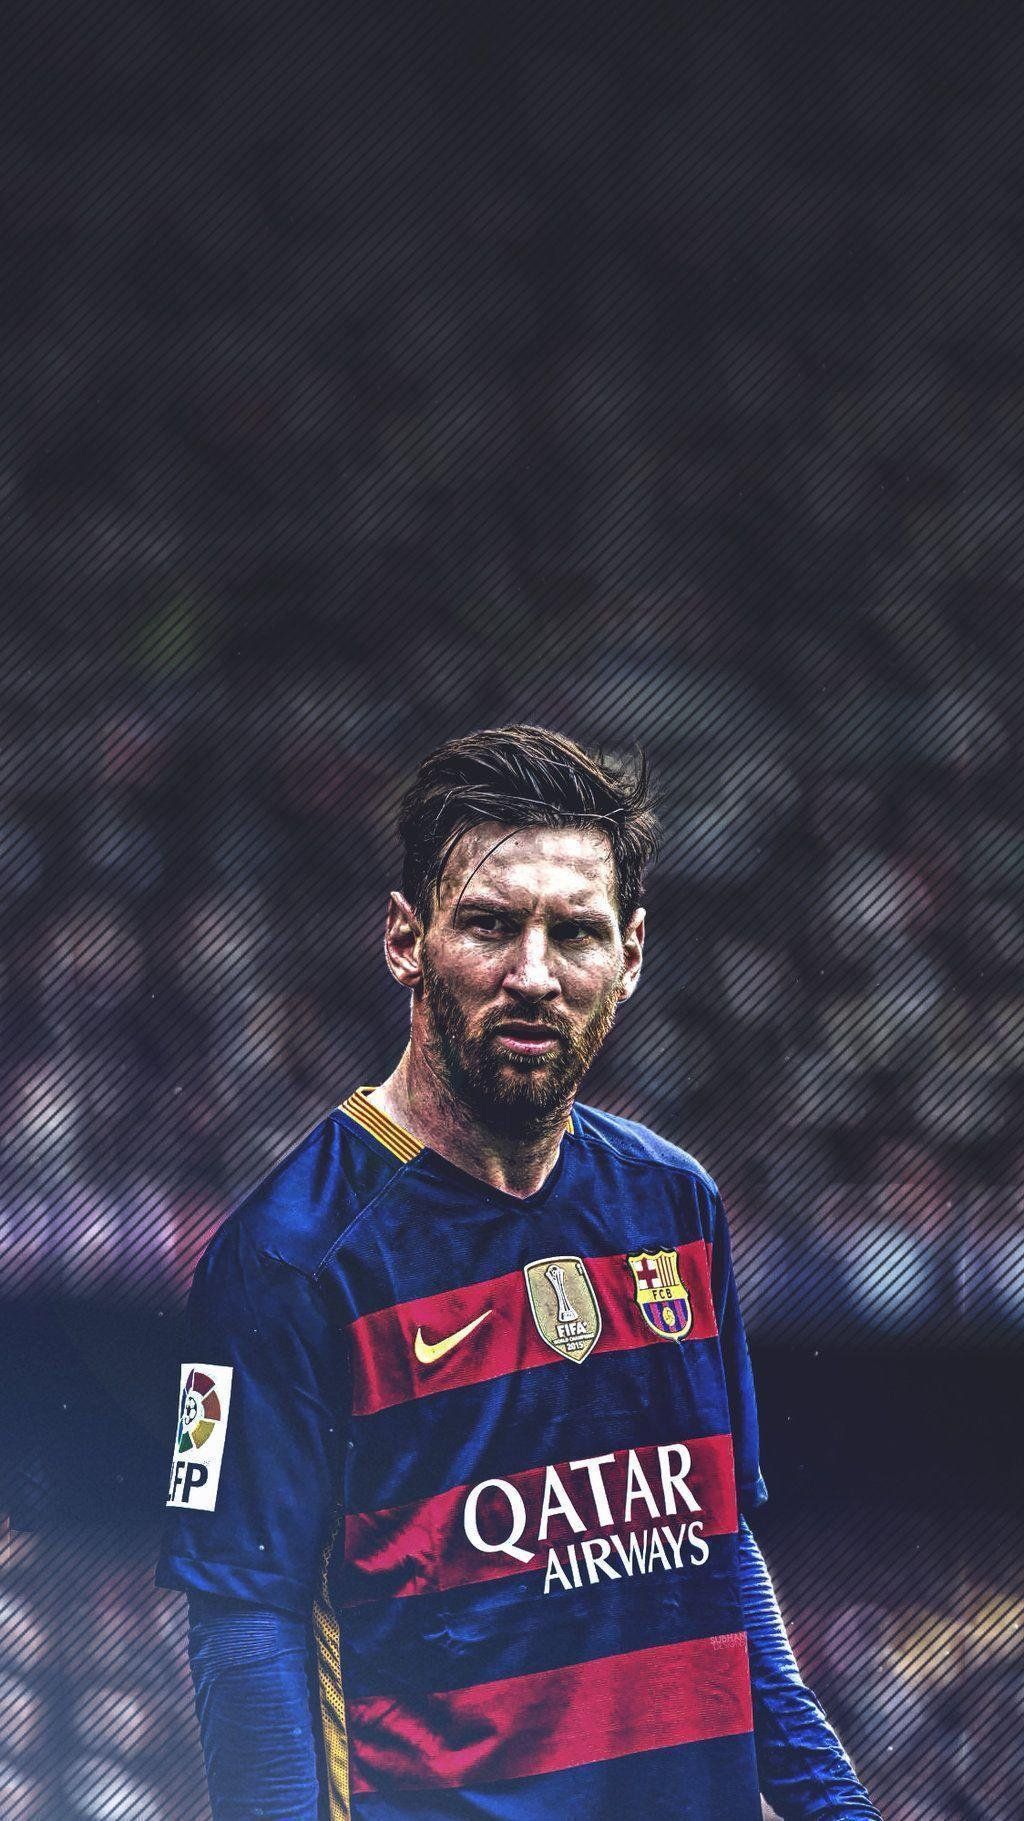 Lionel Messi wallpaper for iPhone with resolution 1080X1920 pixel. You can make this wallpaper for your iPhone 5, 6, 7, 8, X backgrounds, Mobile Screensaver, or iPad Lock Screen - Messi